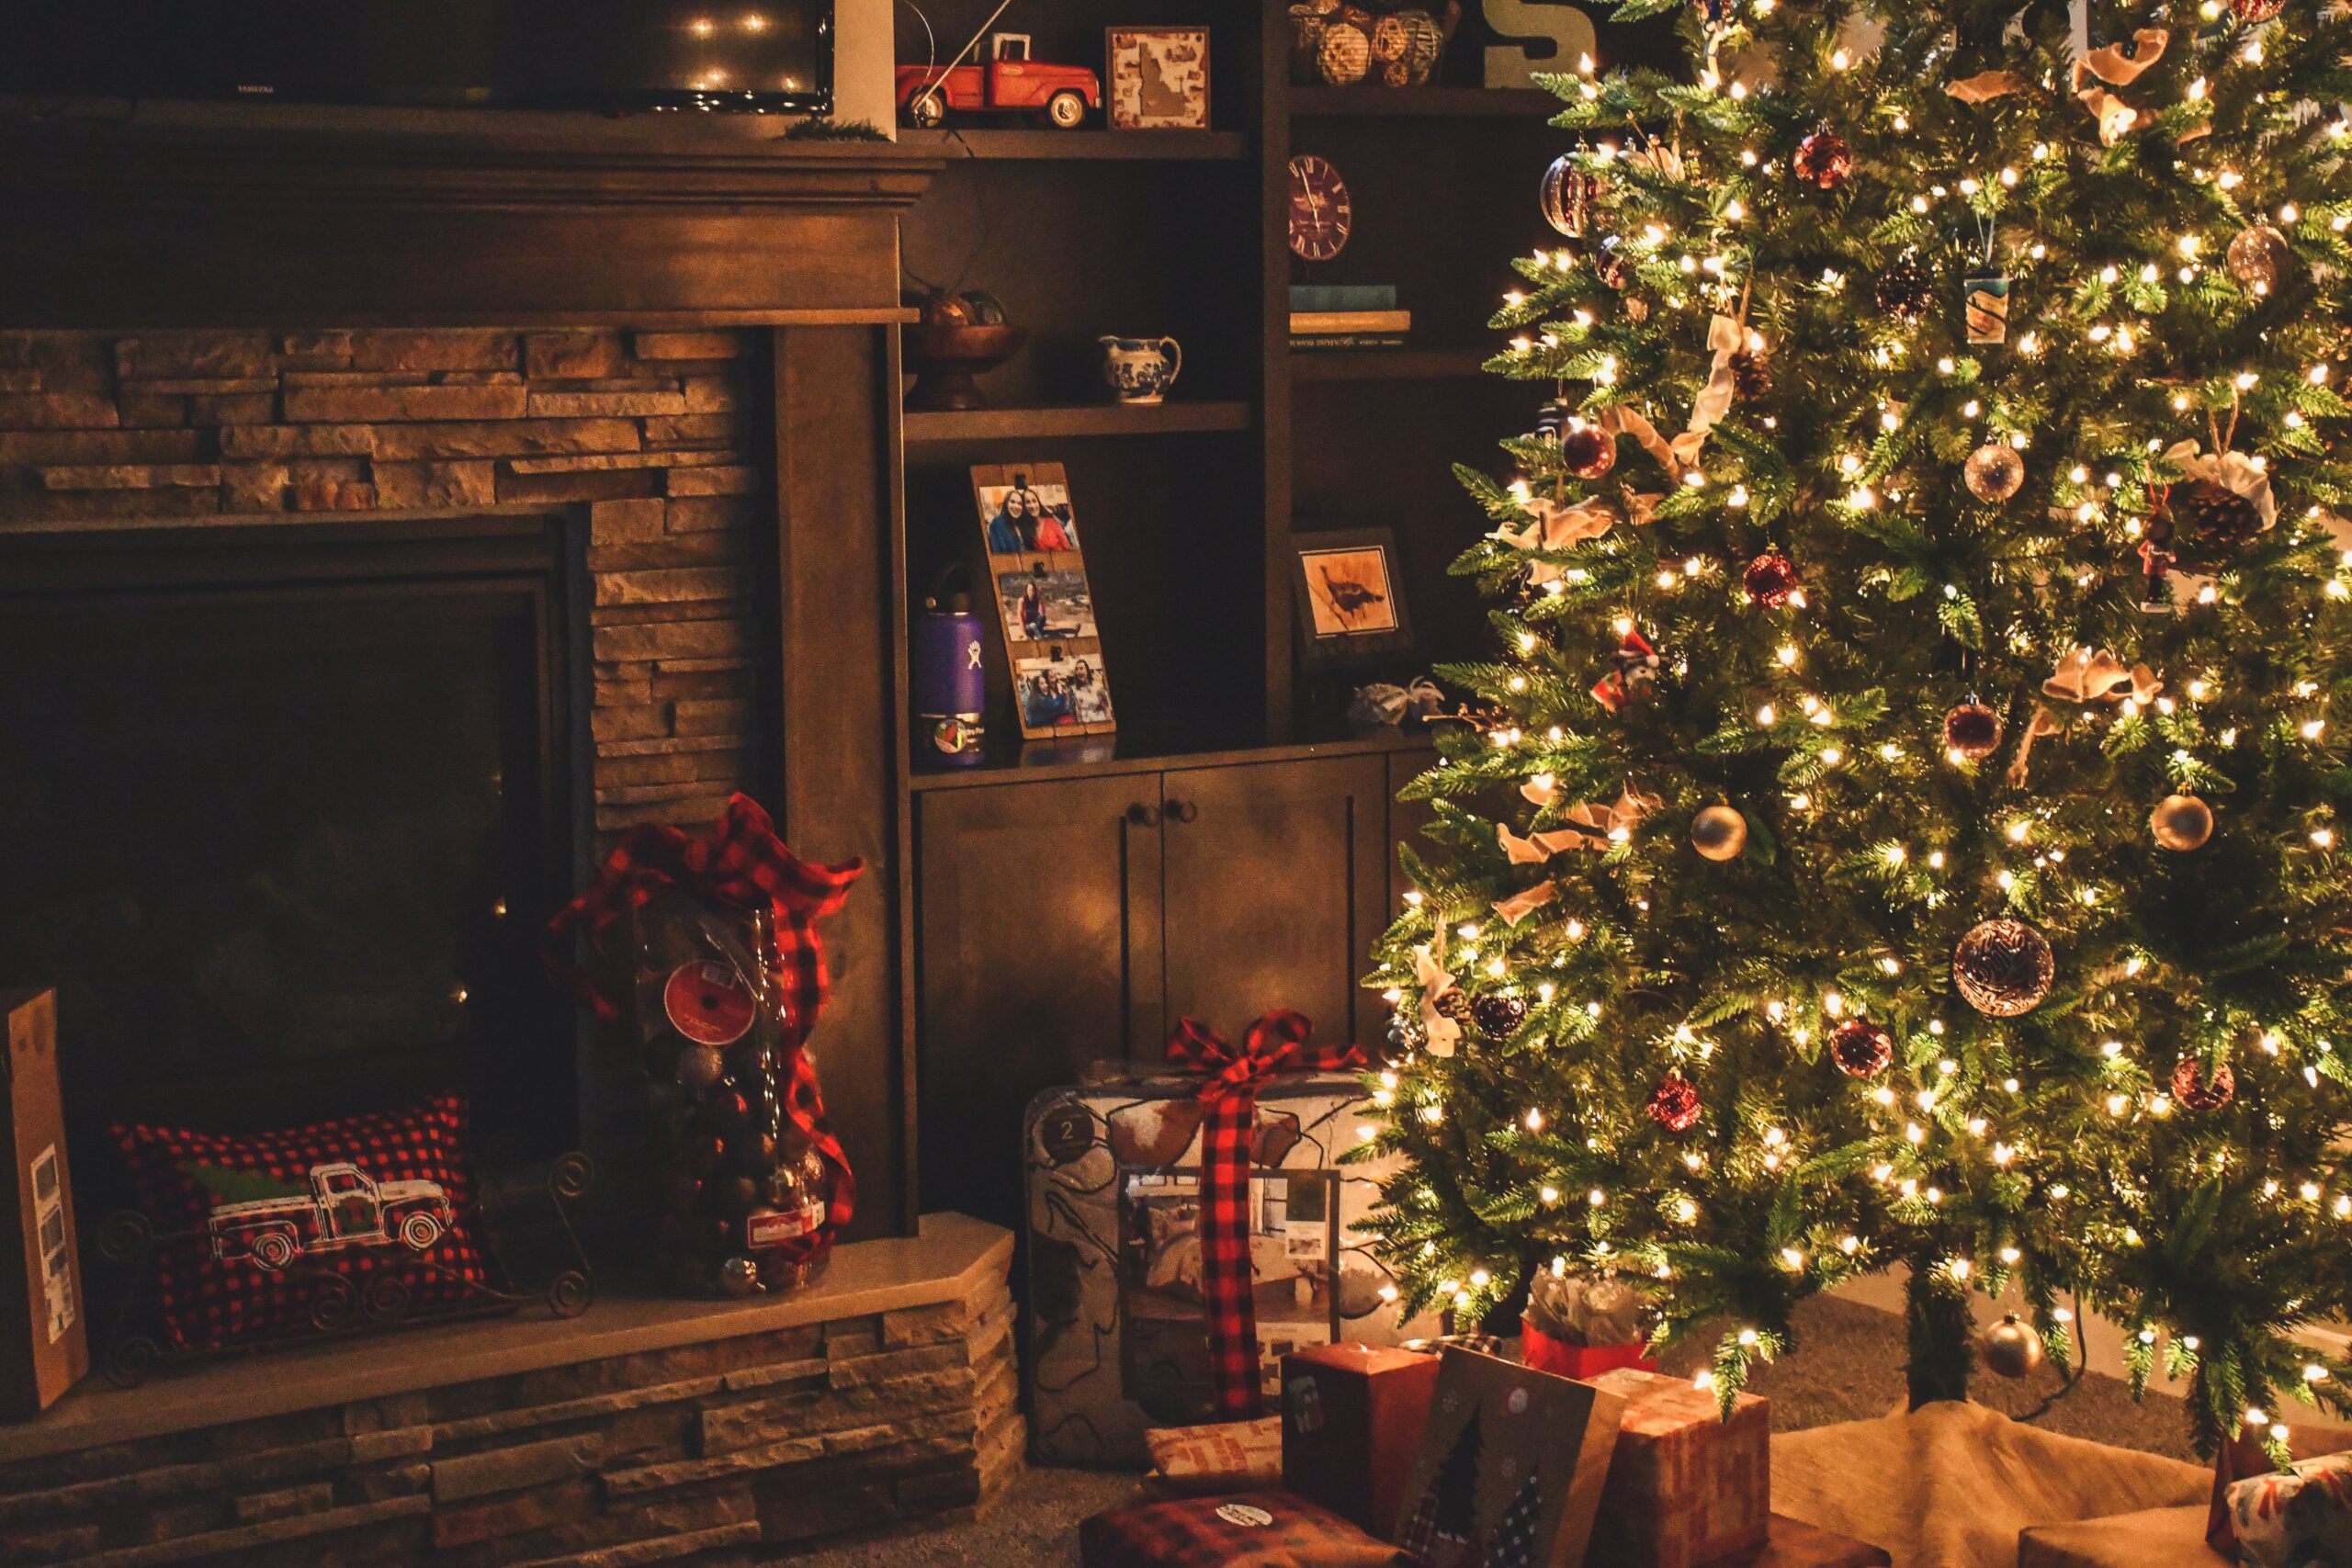 fireplace and lighting safety is crucial for preventing fires during the holiday season